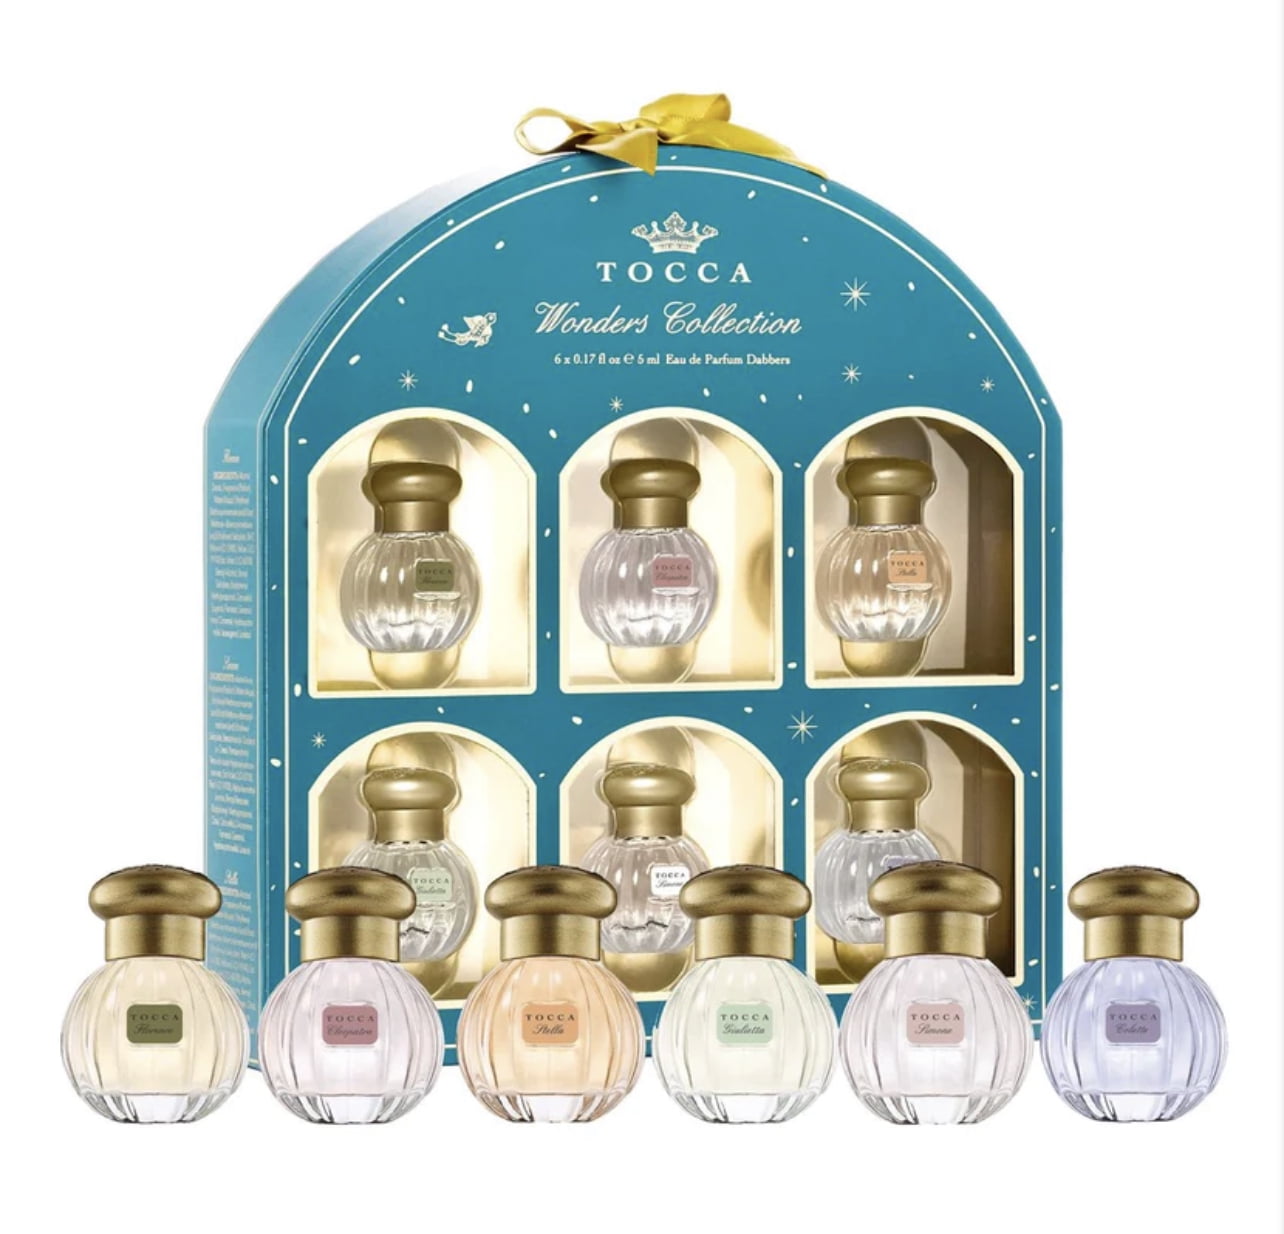 Tocca Wonders Collection -Limited Edition - Mini Perfume Deluxe Set of 6 -  Includes Florence, Cleopatra, Stella, Giulietta, Simone & Colette, Each